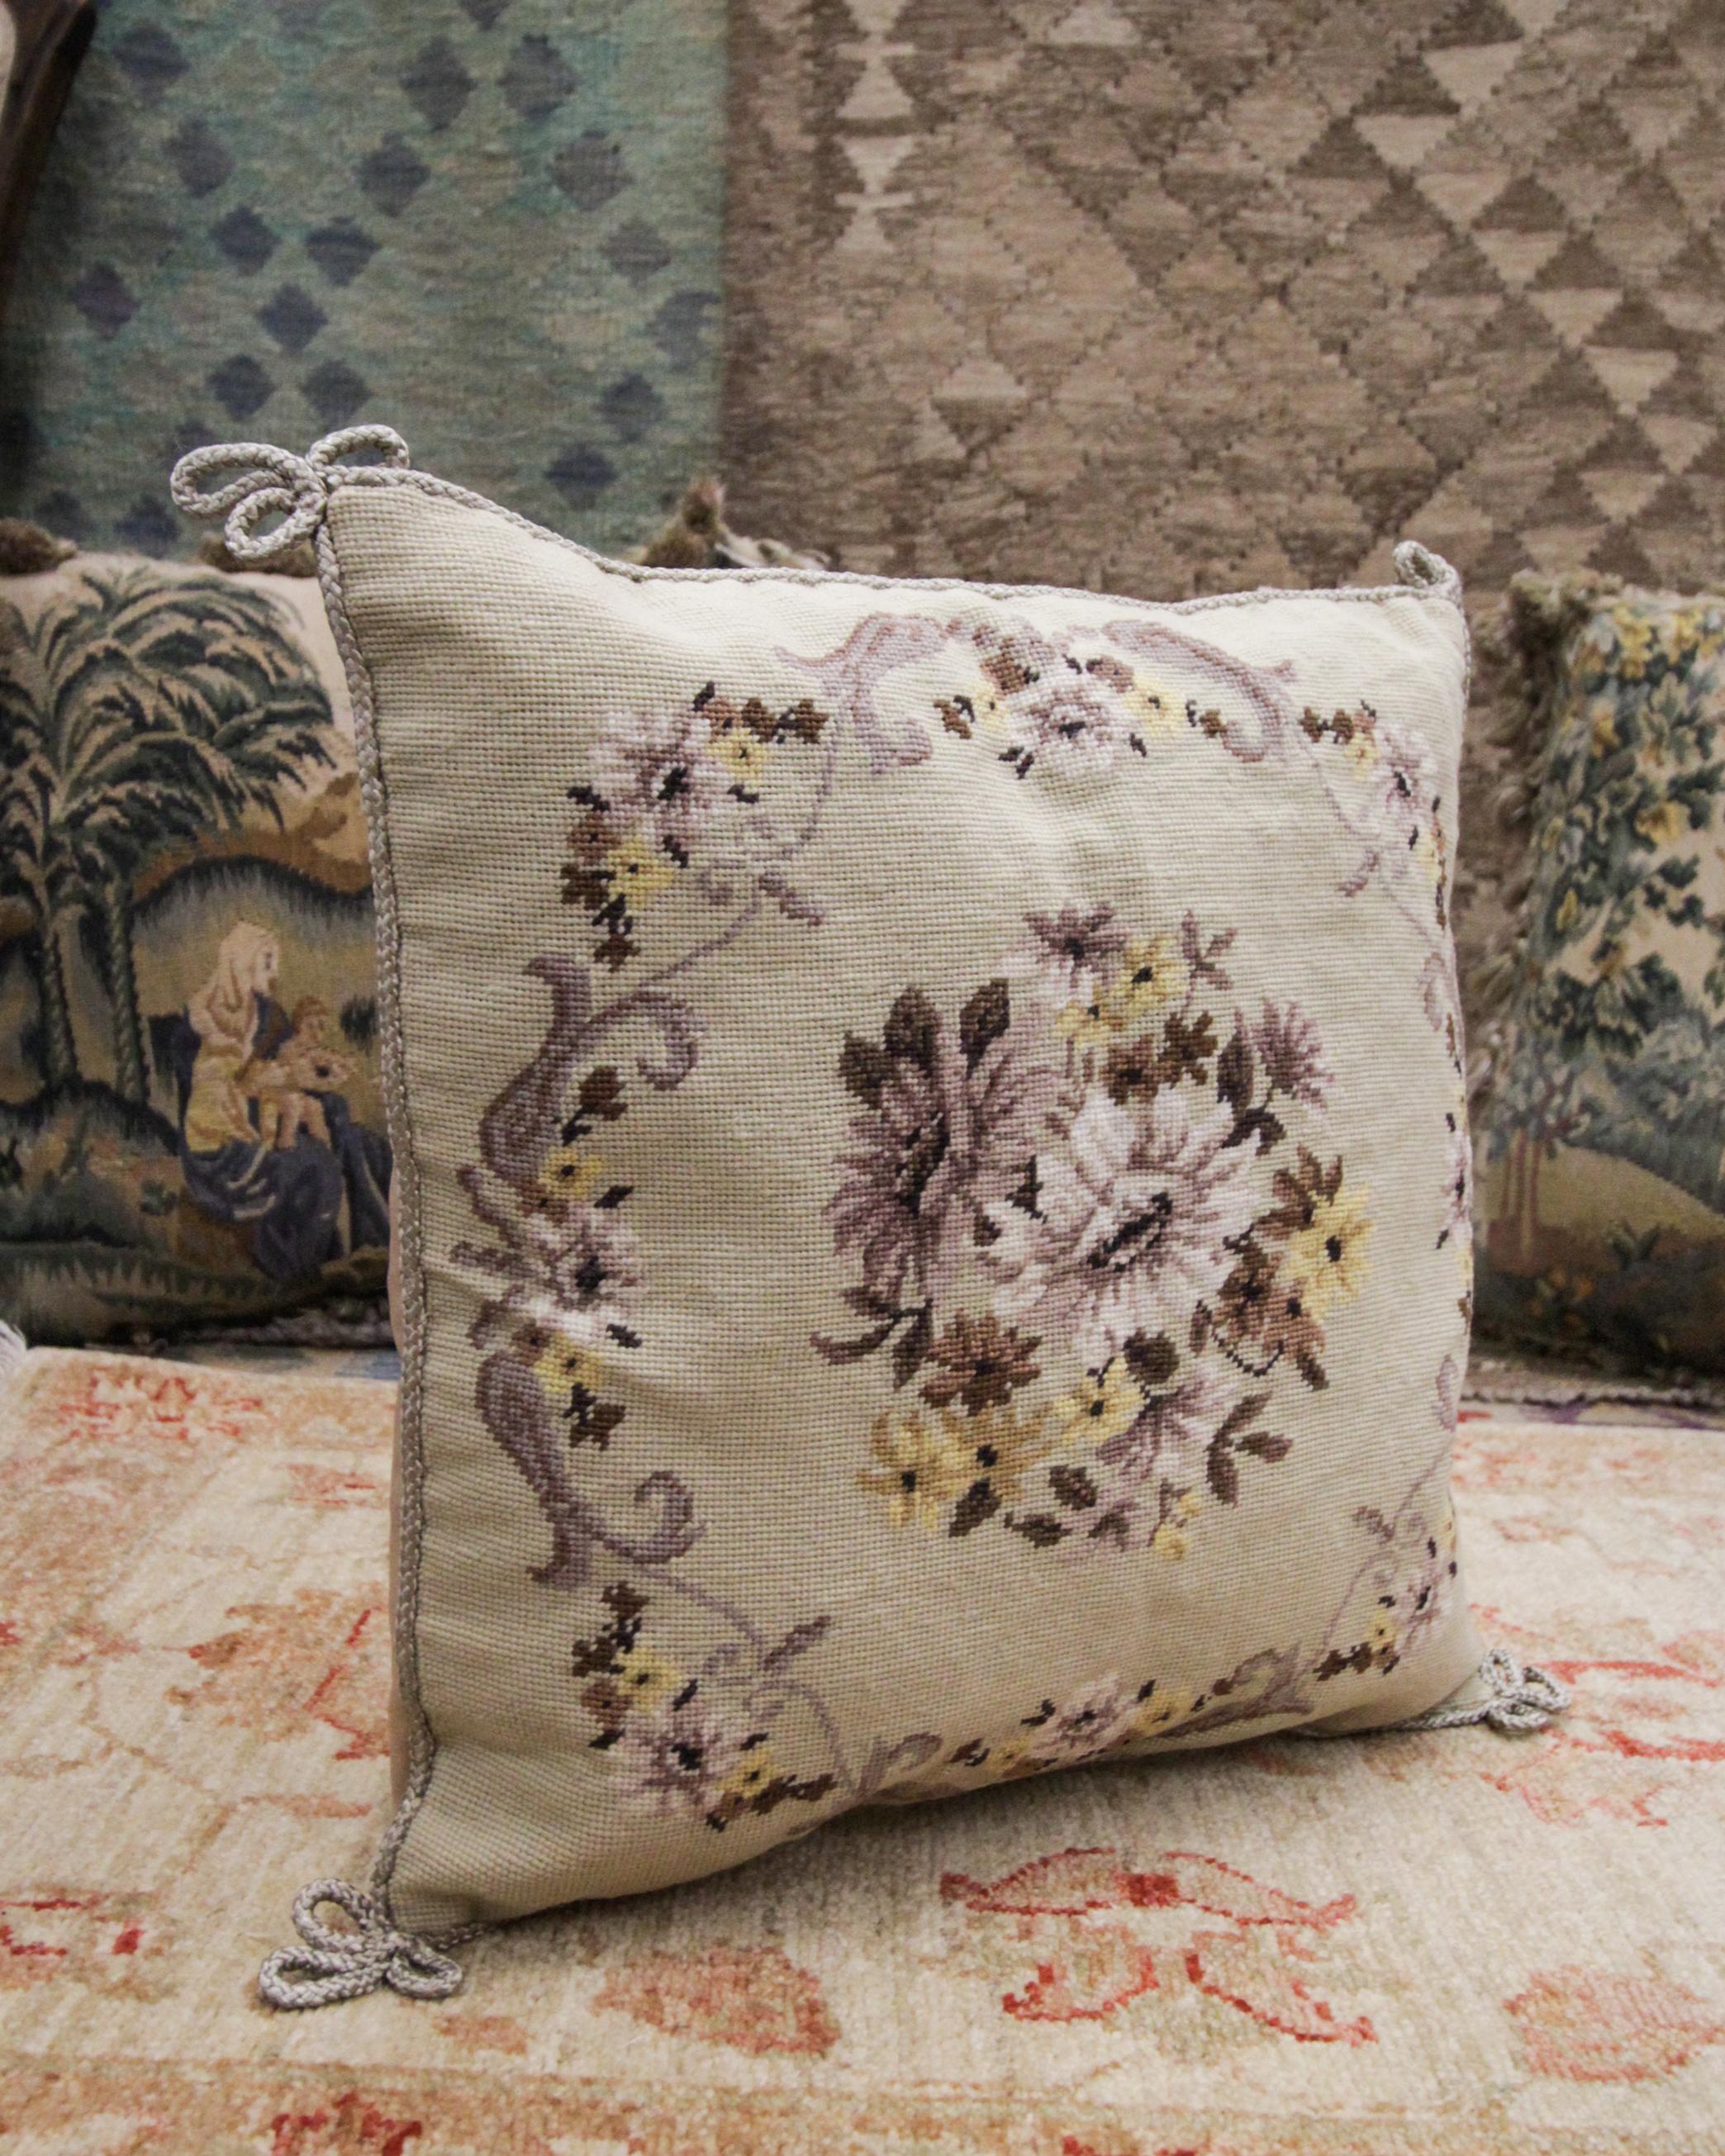 Chinese Floral Handmade Cushion Cover, Needlepoint Cream Purple Wool Scatter Cushion